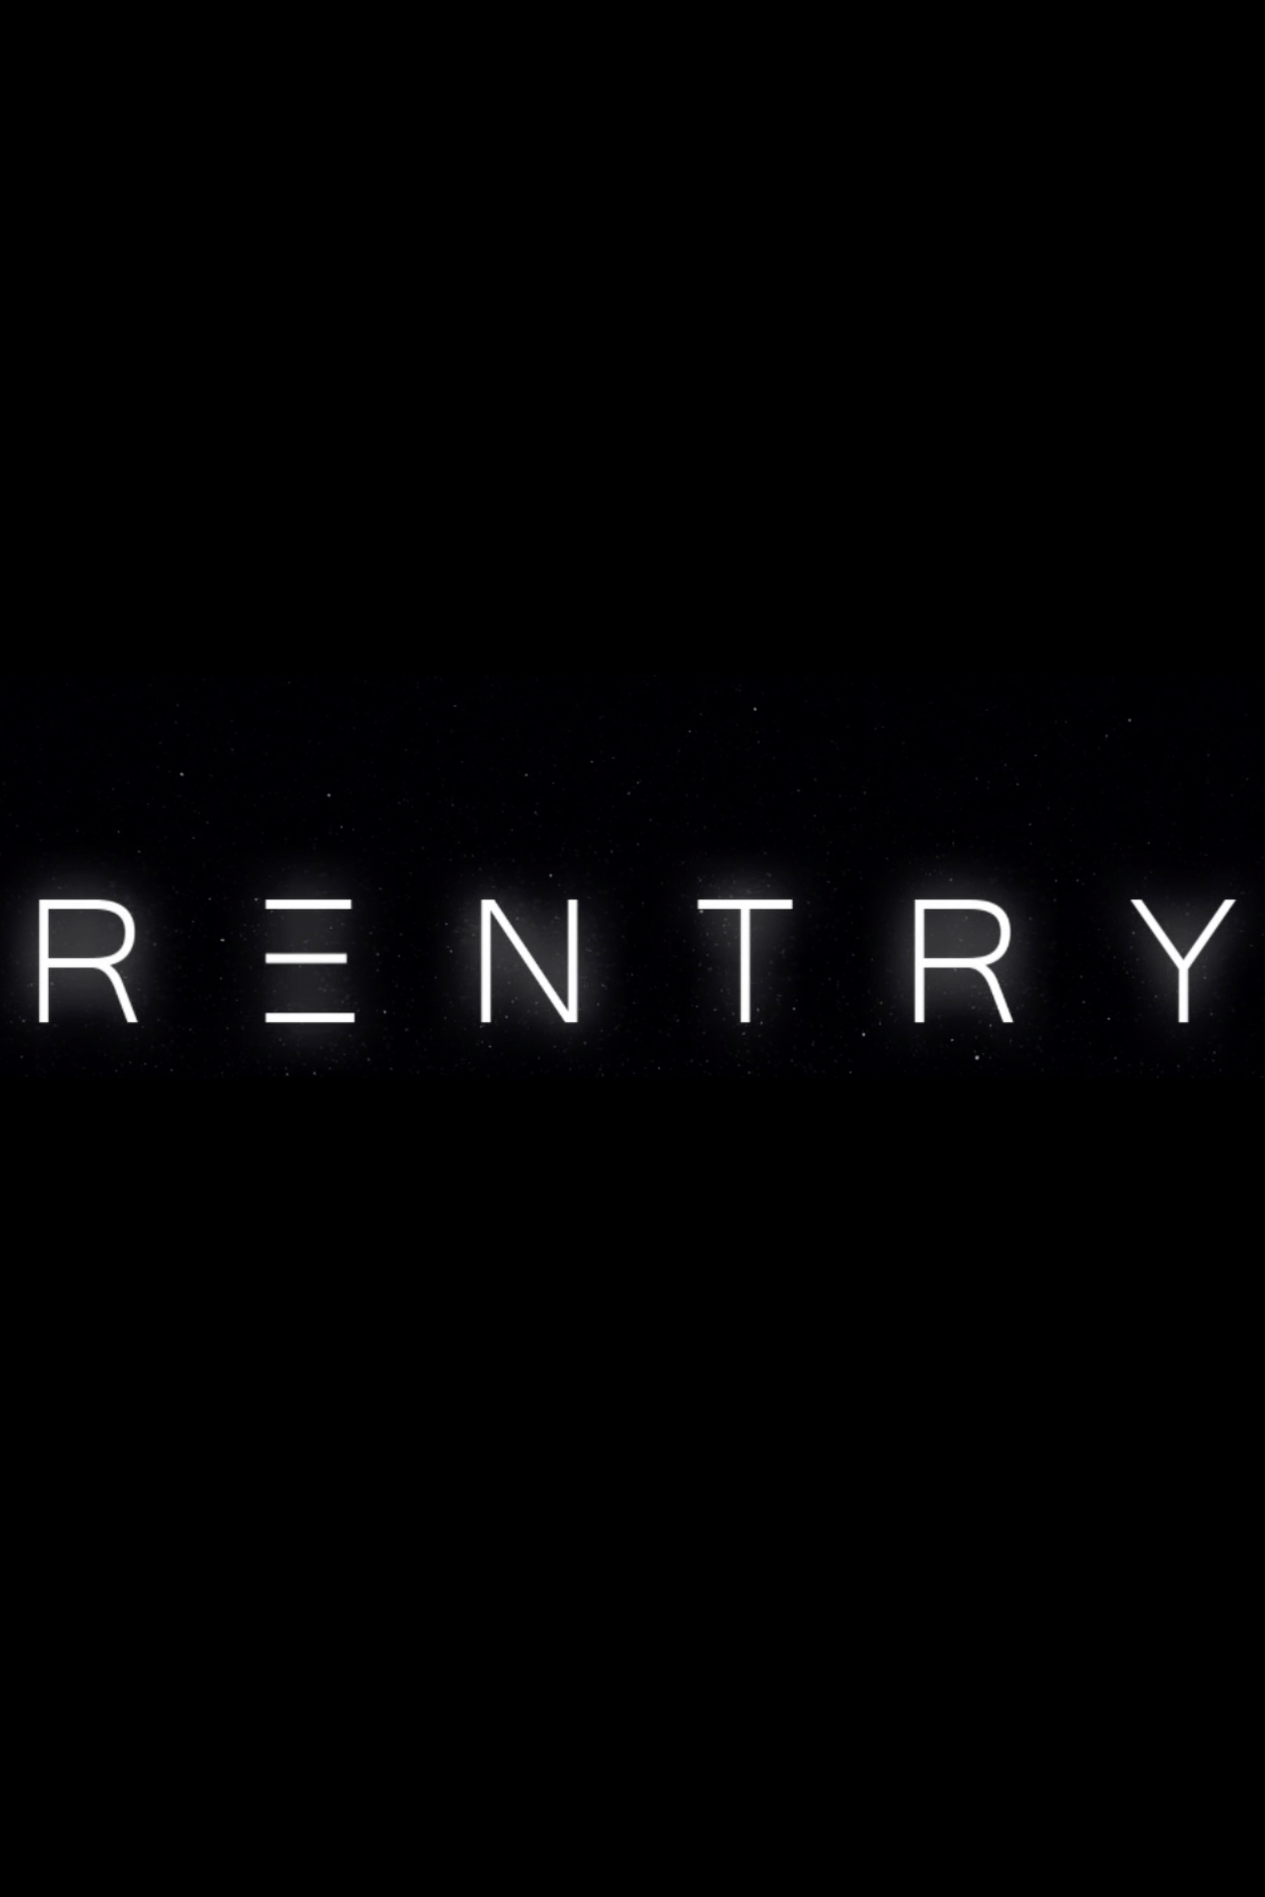 Re-Entry